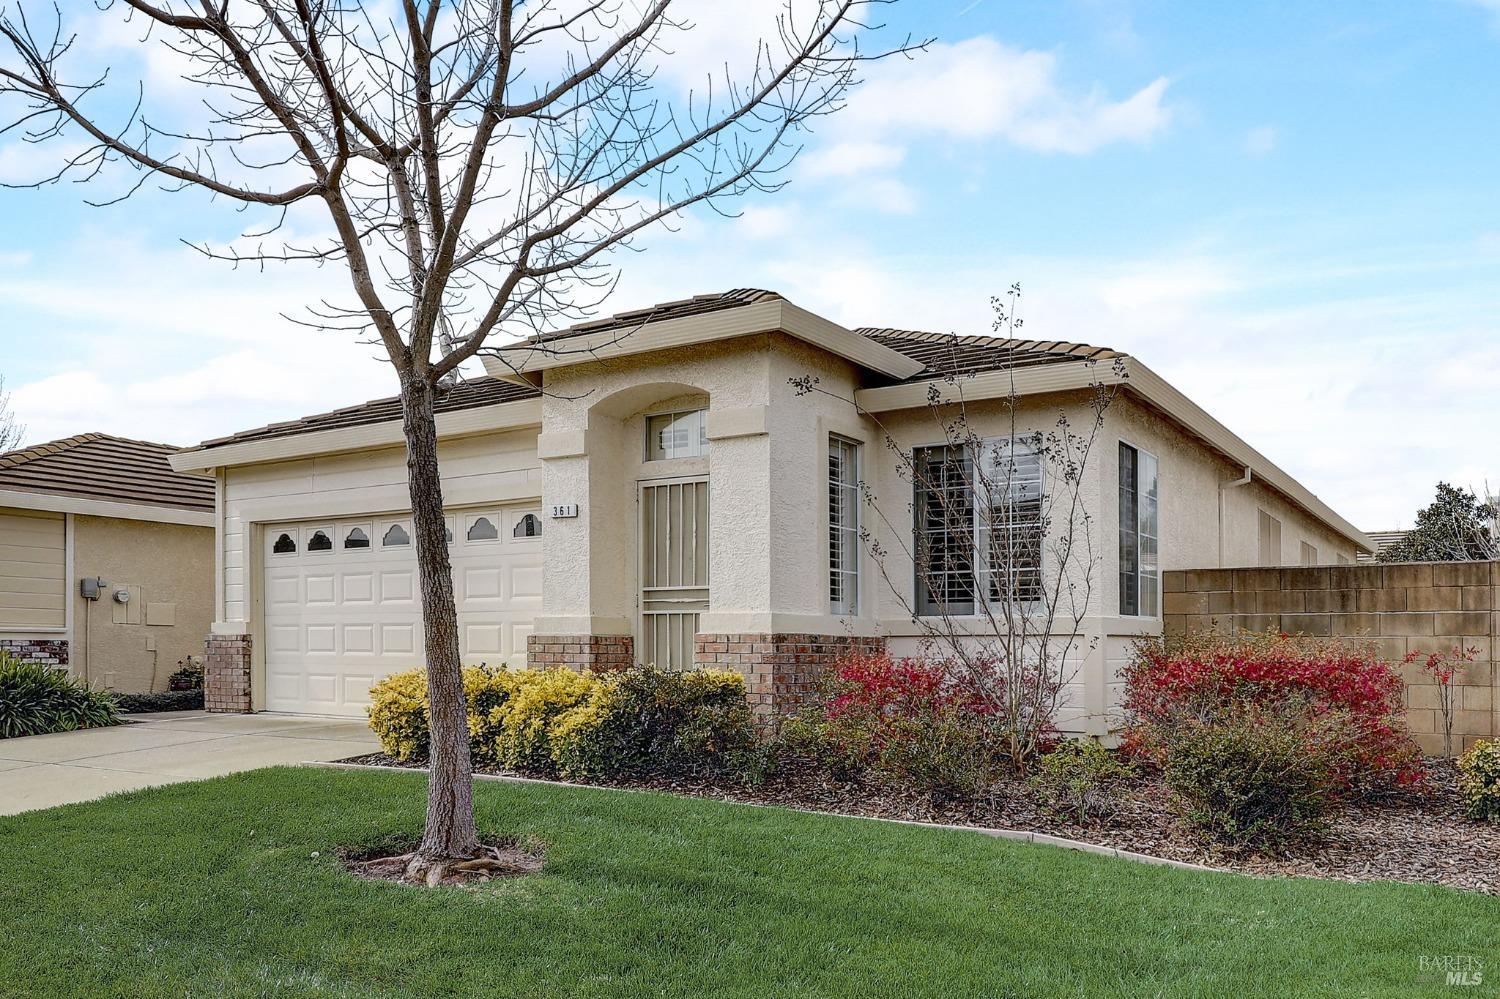 Photo of 361 Bartlett Ln in Vacaville, CA